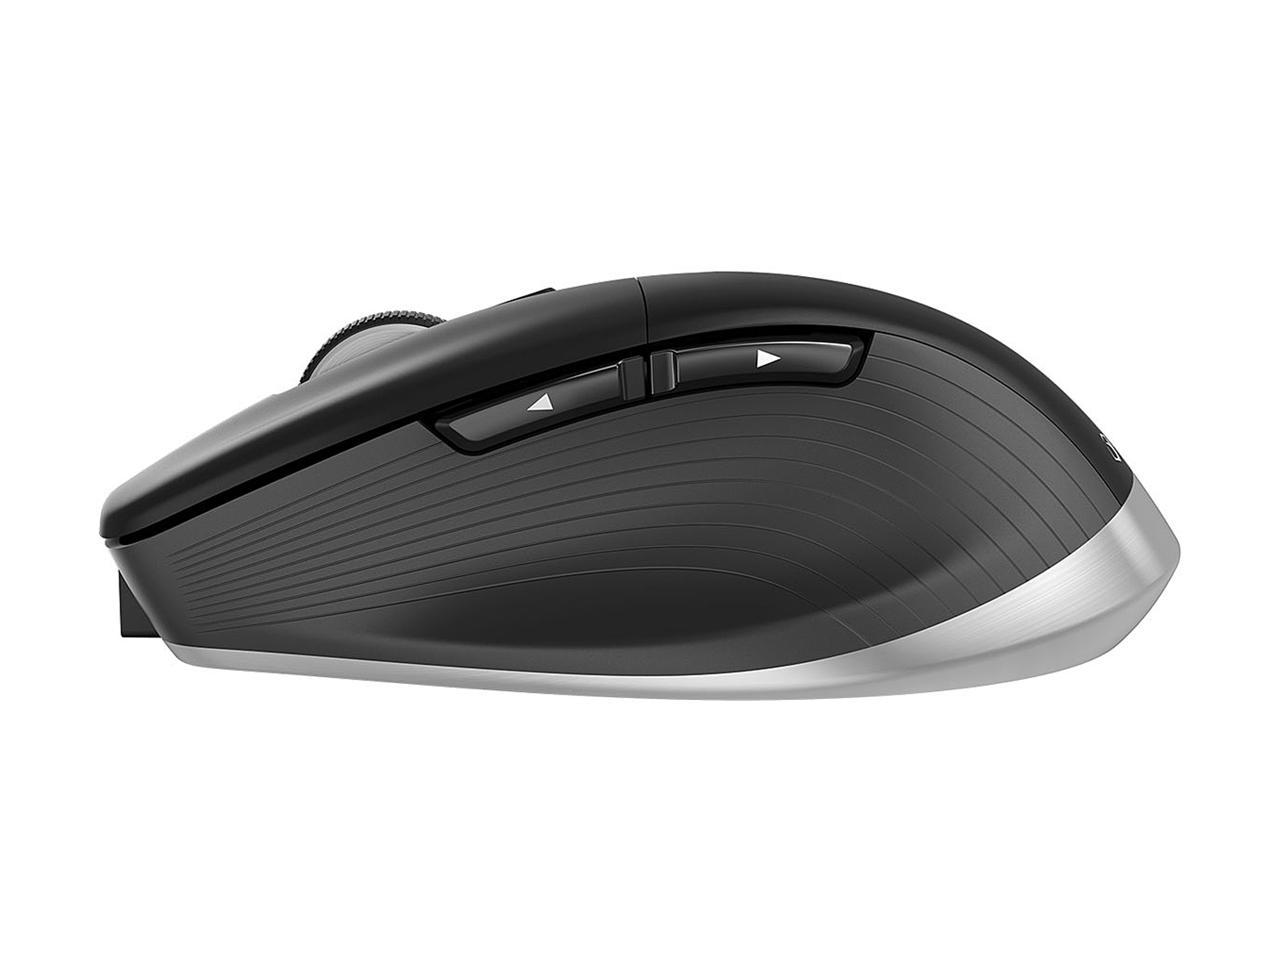 3DConnexion - 3DX-700078 - 3Dconnexion CadMouse Pro Wireless - Cable/Wireless - Radio Frequency - 2.40 GHz - USB - 7200